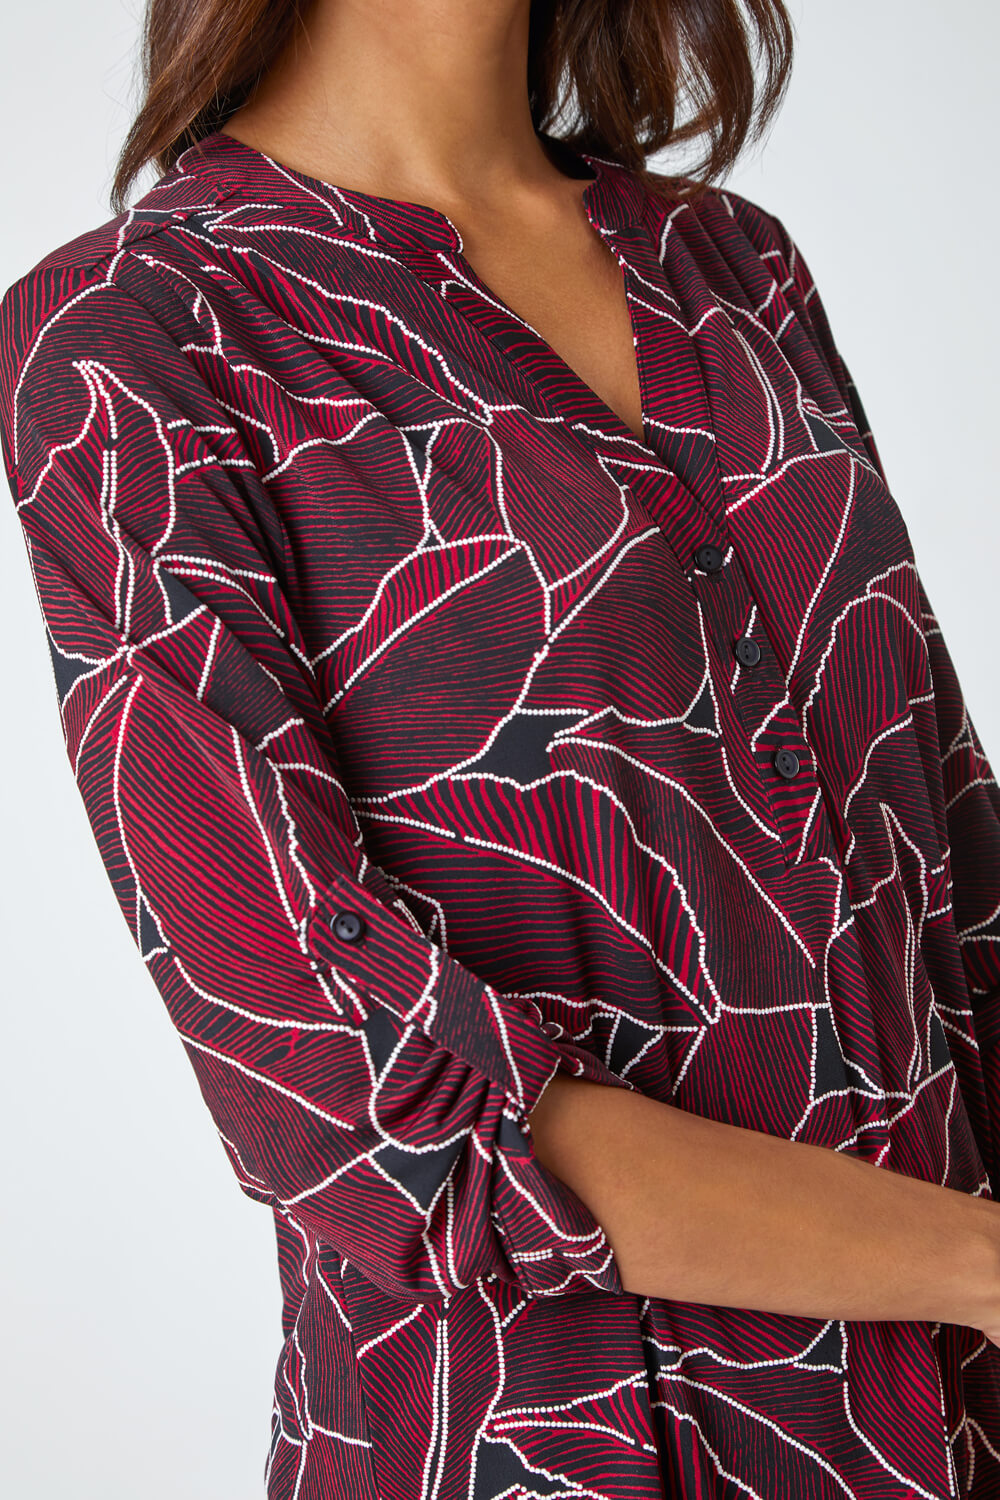 Red Textured Leaf Stretch Jersey Top, Image 5 of 5